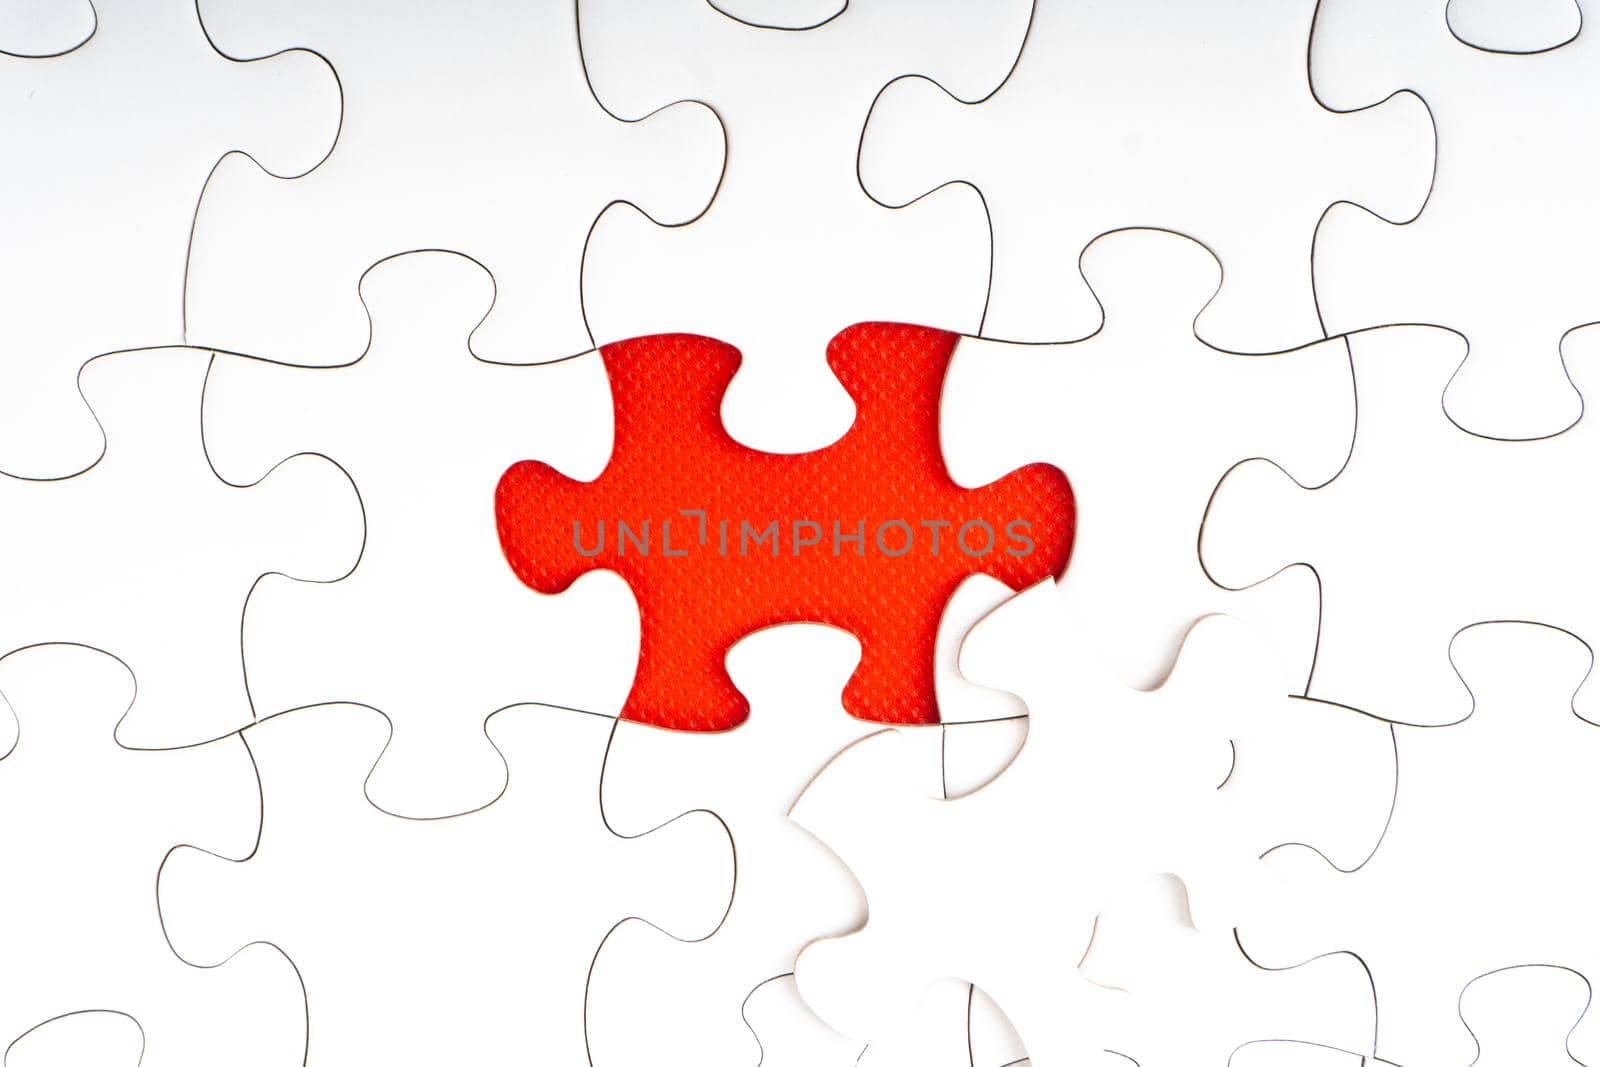 Jigsaw puzzle pieces on red background.  by silverwings